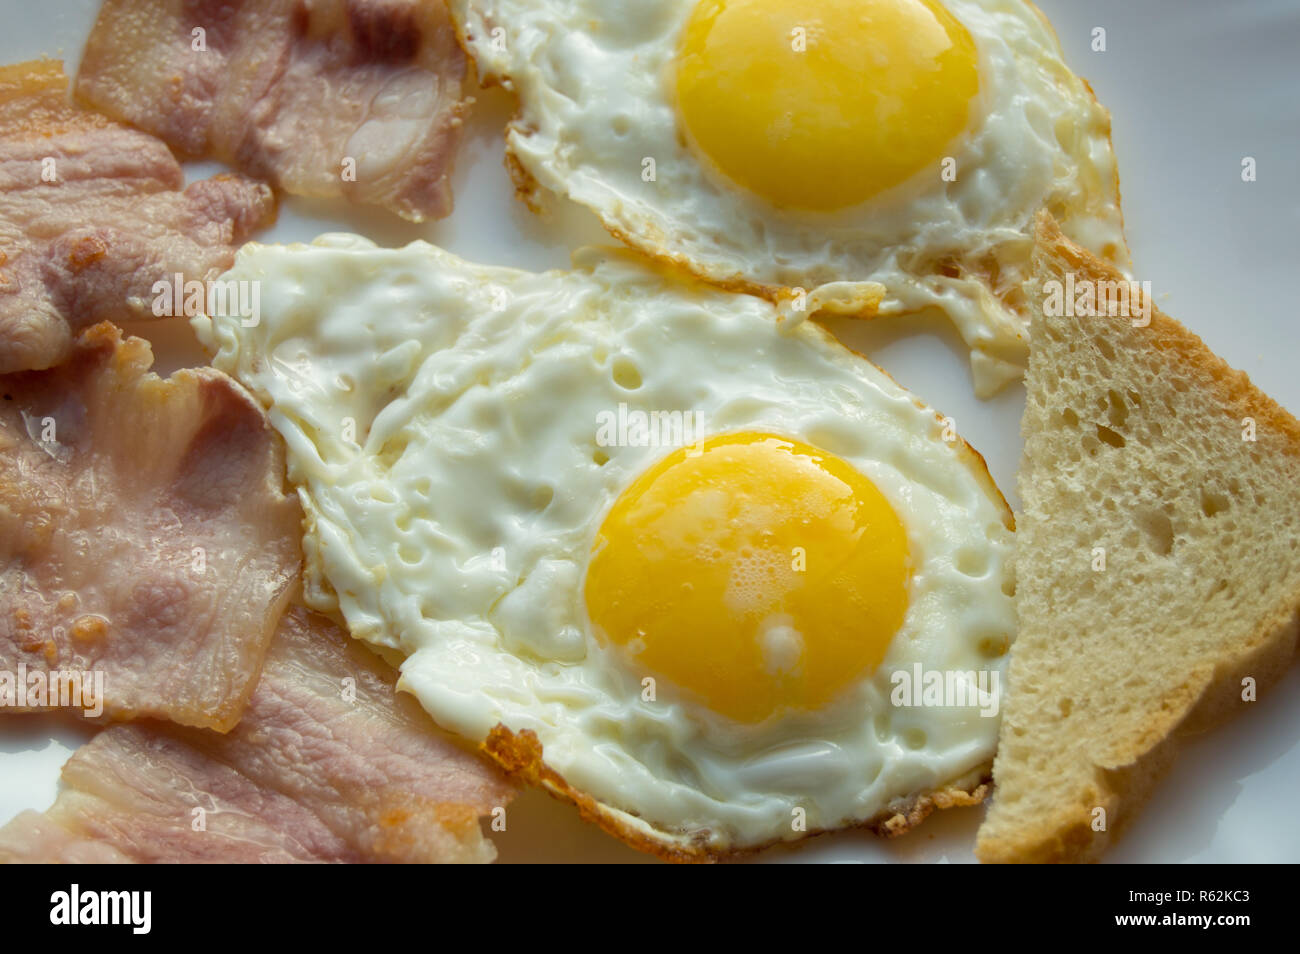 Delicious Breakfast - white plate of fried eggs, bacon and toast Stock Photo